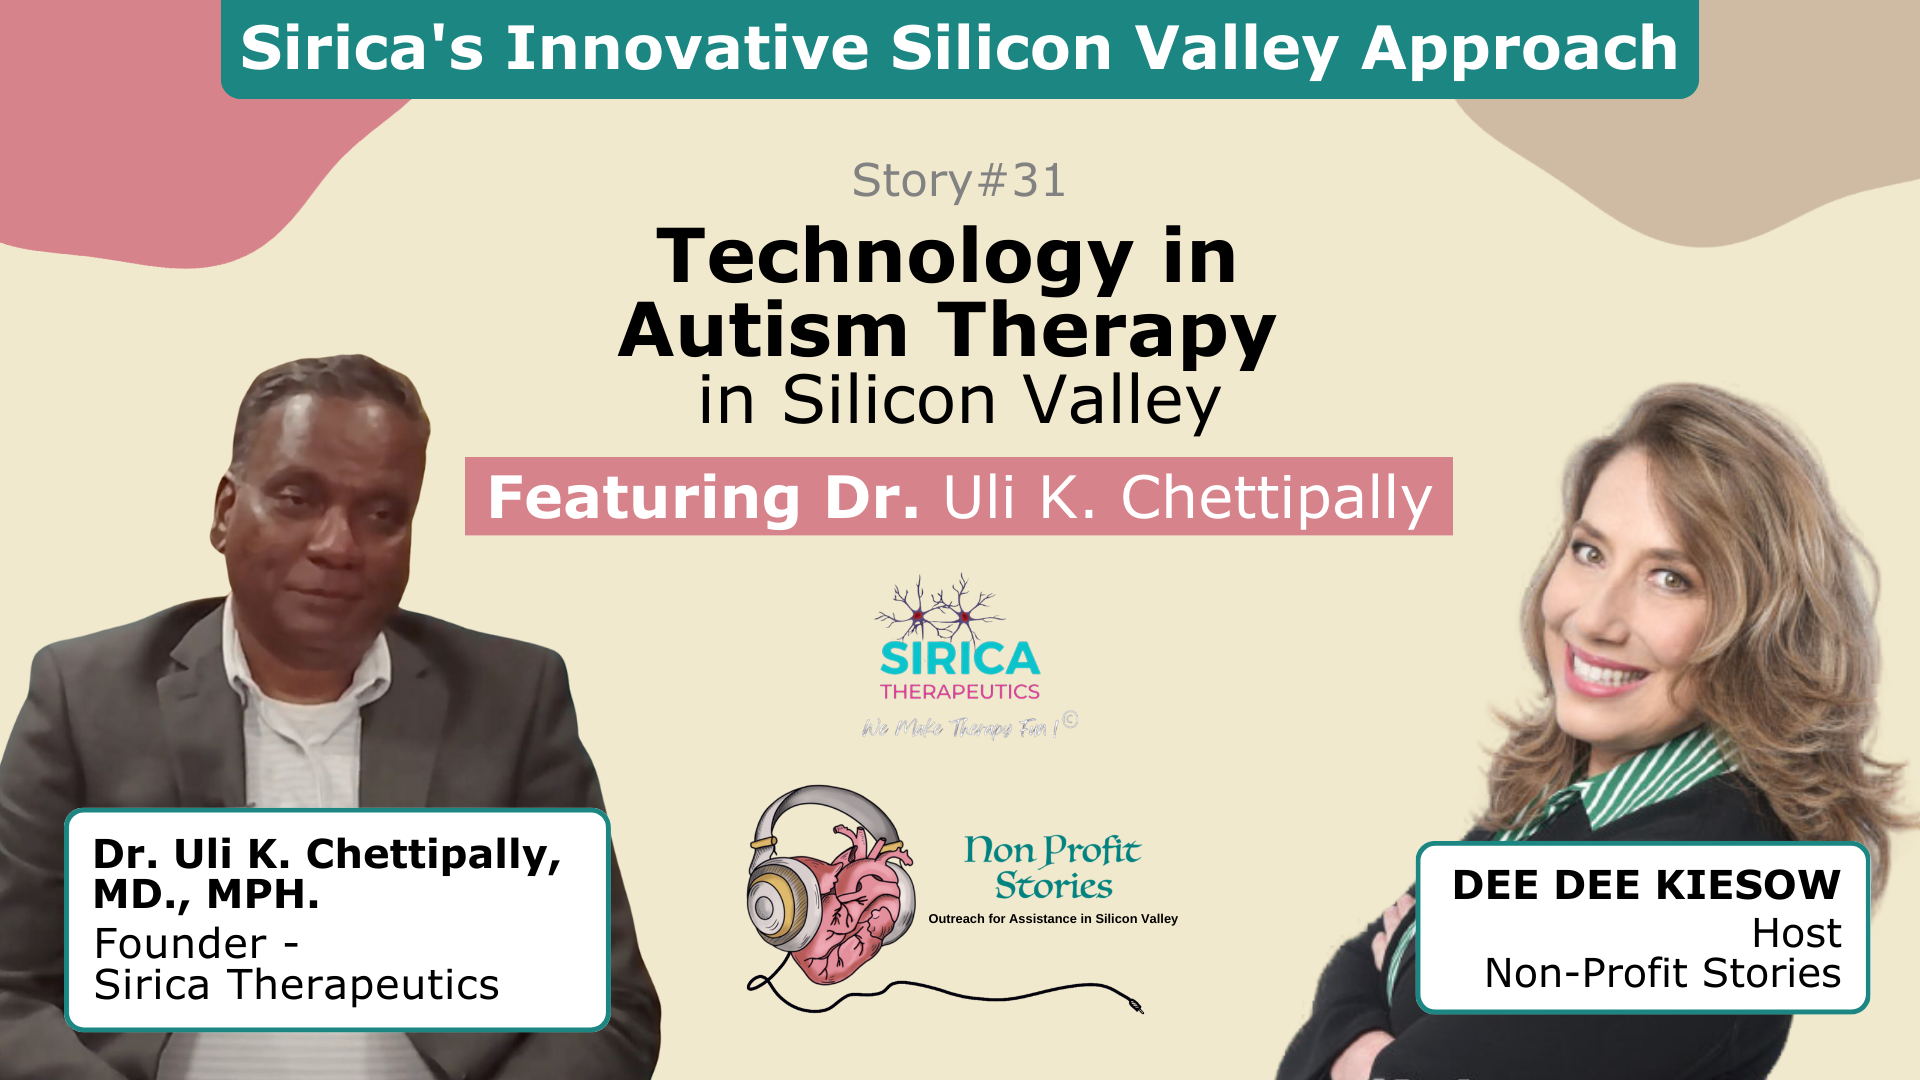 Technology in Autism Therapy: Sirica’s Innovative Silicon Valley Approach Video